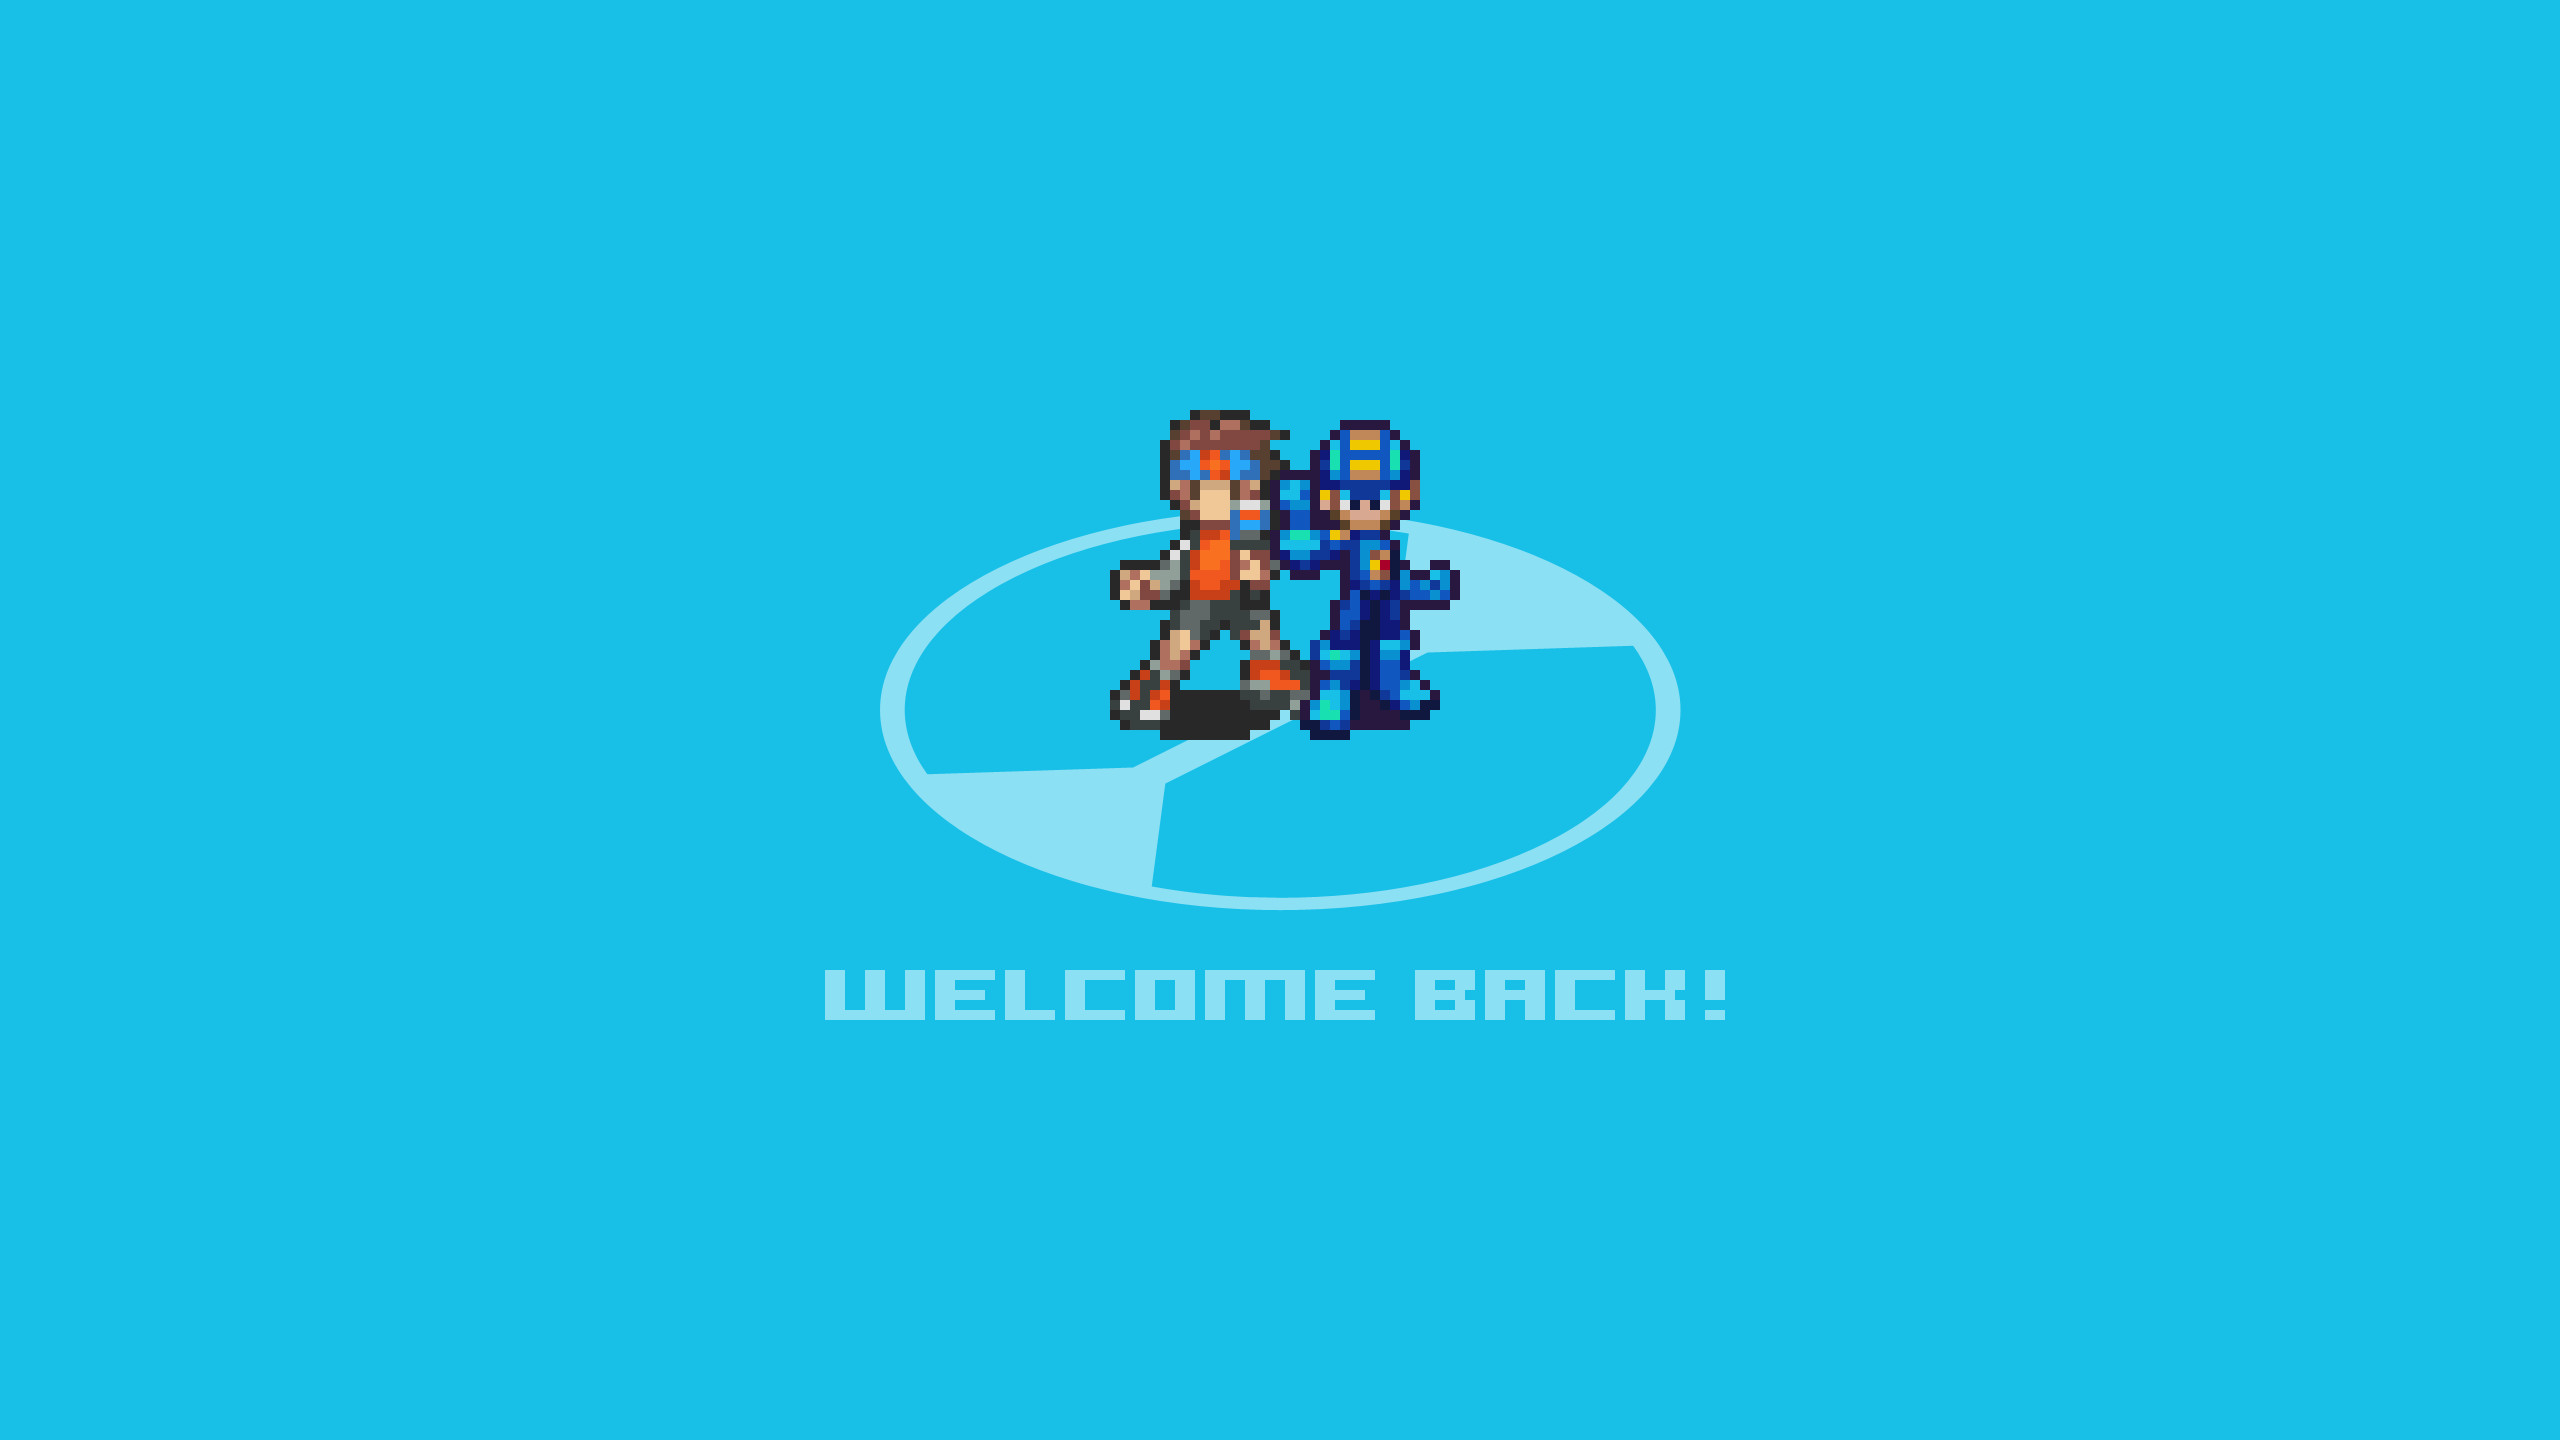 2560x1440 Welcome Back!